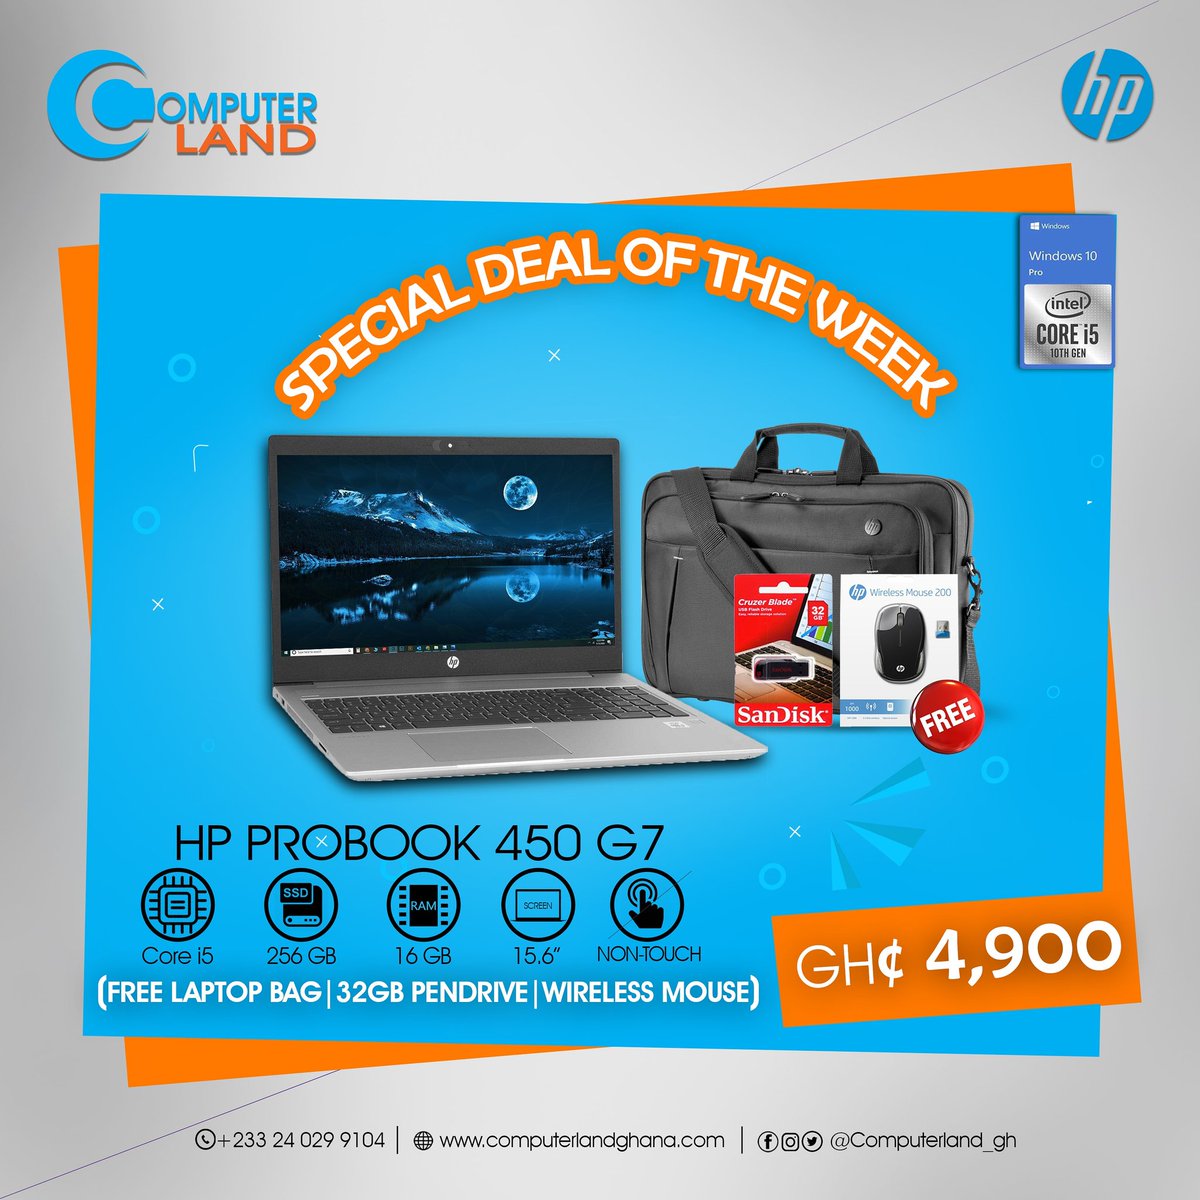 Looking for a new laptop to buy? Where my computer lovers at since Computerland is here to blow mind with the best price and free gifts!
Hurry now and do not miss this whooping offer!!!🥳
#Computerland #hp #hplaptopdeals #laptops #freegift #freegoodies #bestdealsintown